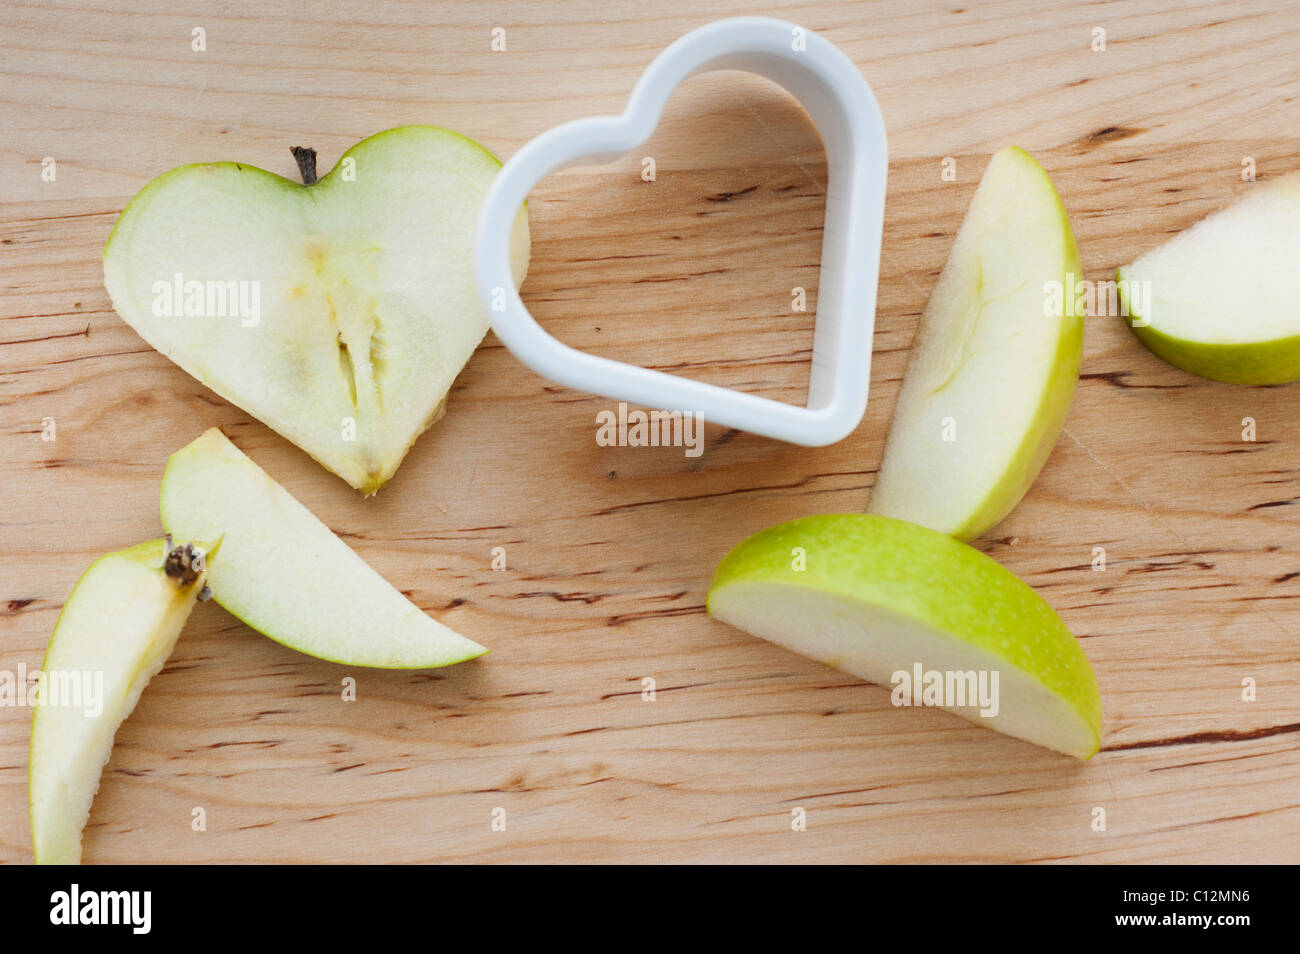 https://c8.alamy.com/comp/C12MN6/heart-shaped-apples-with-cutter-on-chopping-board-C12MN6.jpg